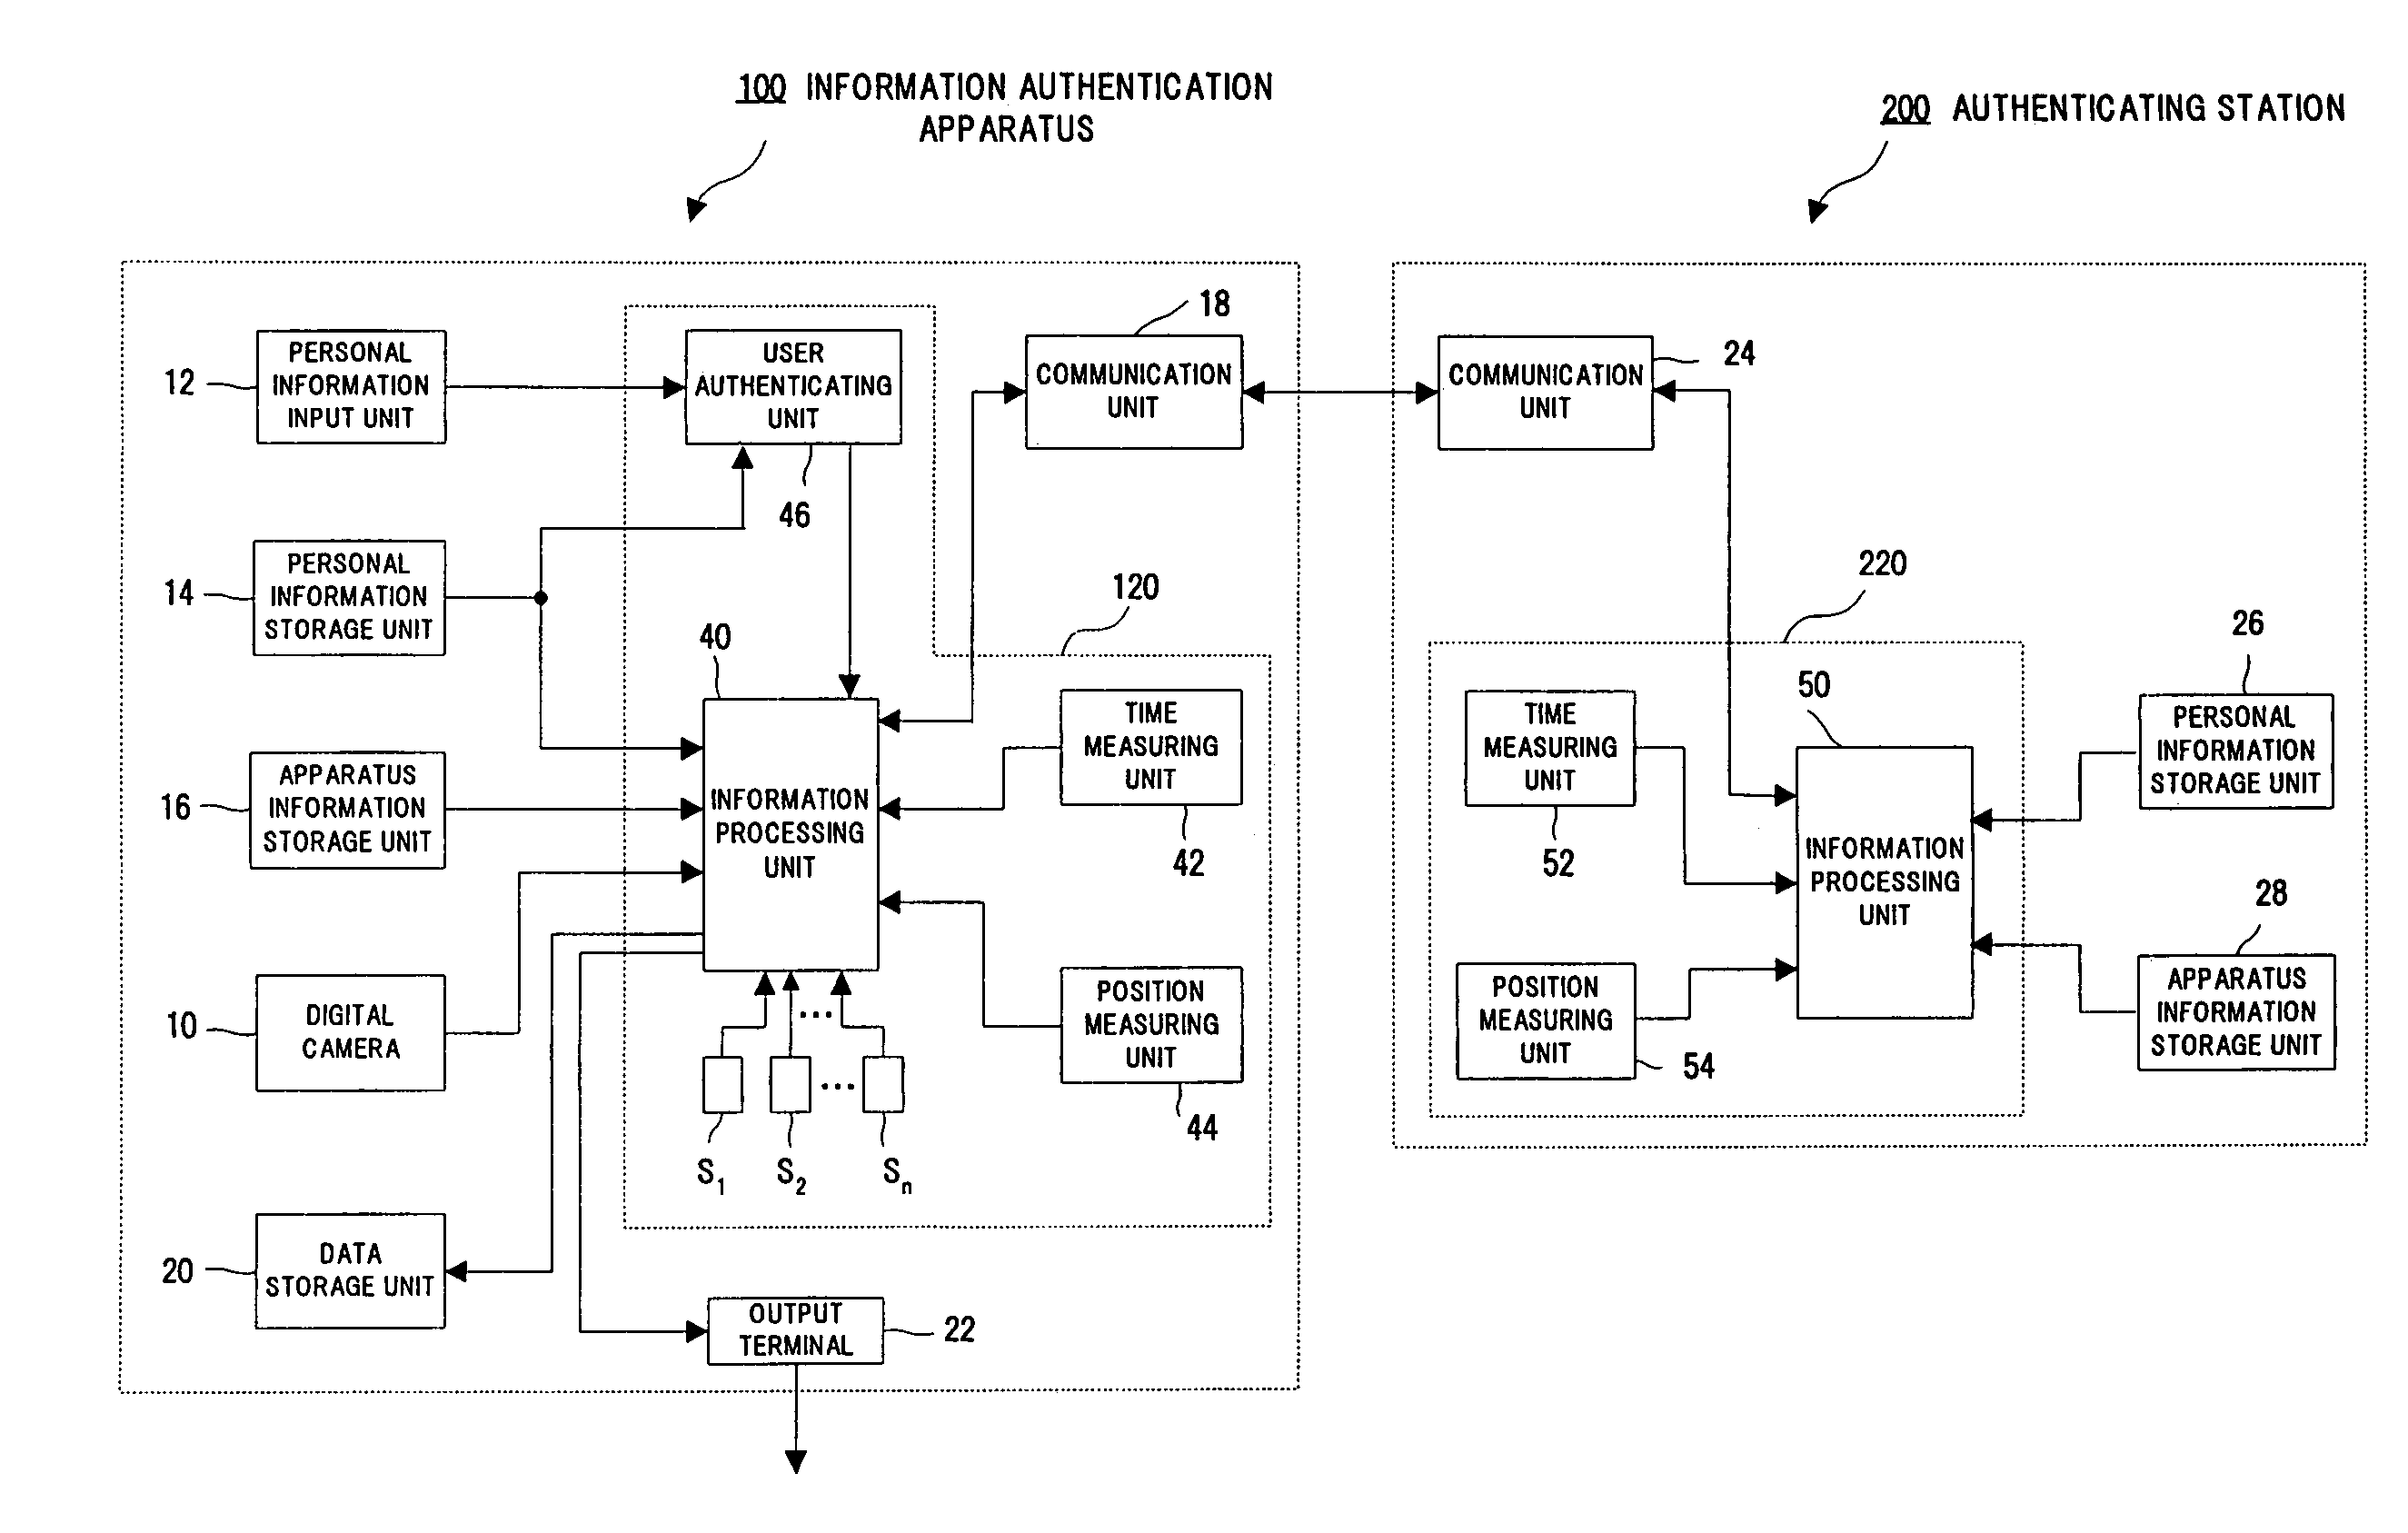 Information authenticating apparatus and authenticating station